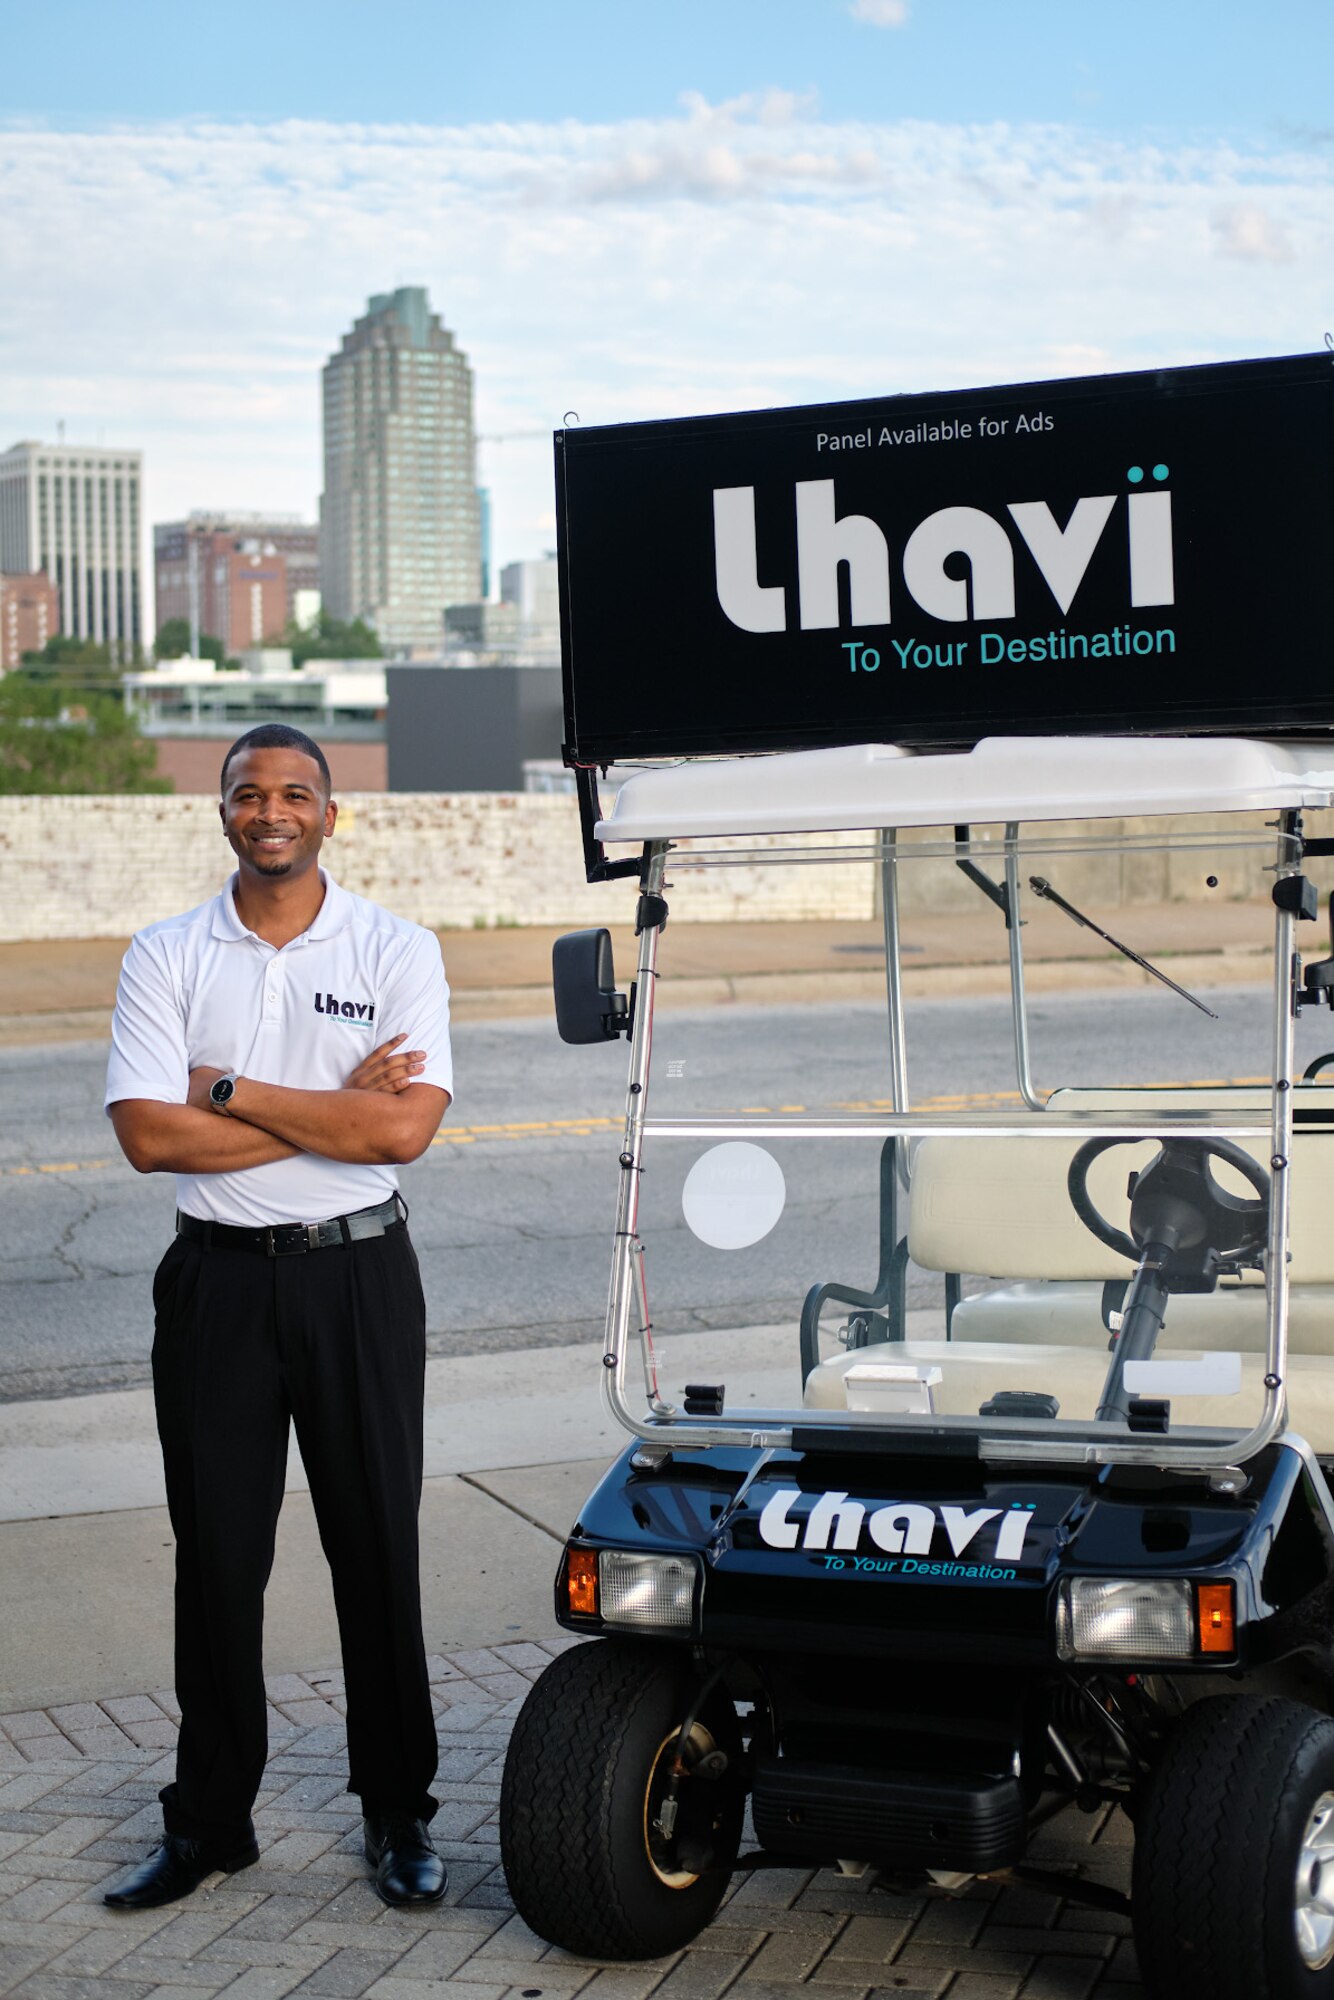 Nathaniel Torres, a self-proclaimed analytical thinker, launched Lhavi, a transportation service in Downtown Raleigh, North Carolina, June 25, 2019.